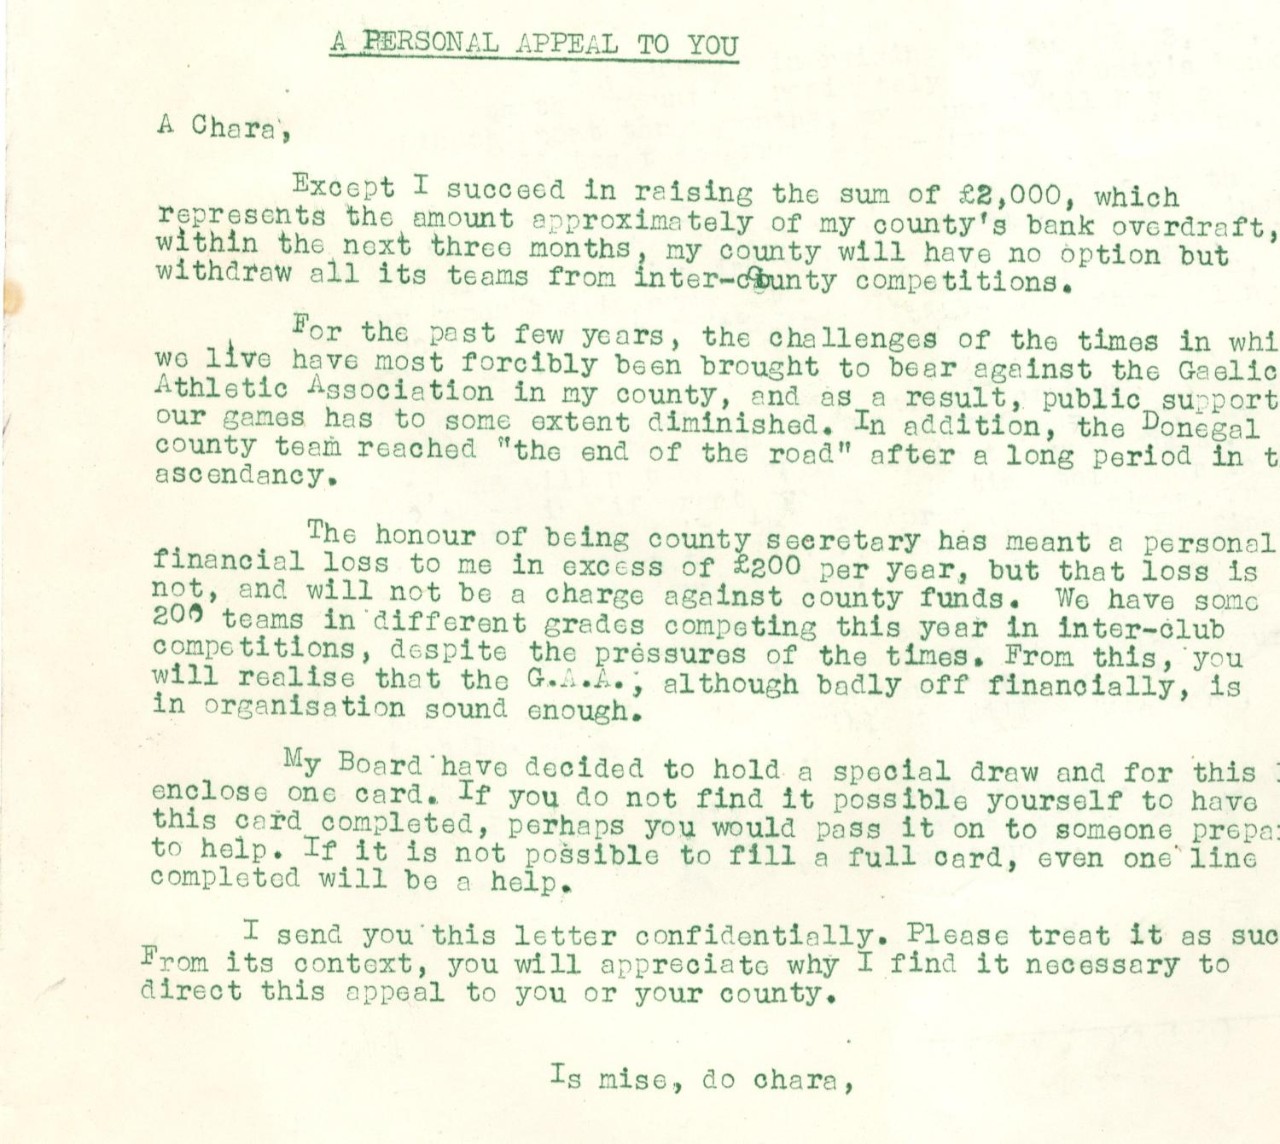 Many volunteers incurred personal financial losses in their roles within the GAA, as portrayed by this letter from a Donegal County Board Secretary.